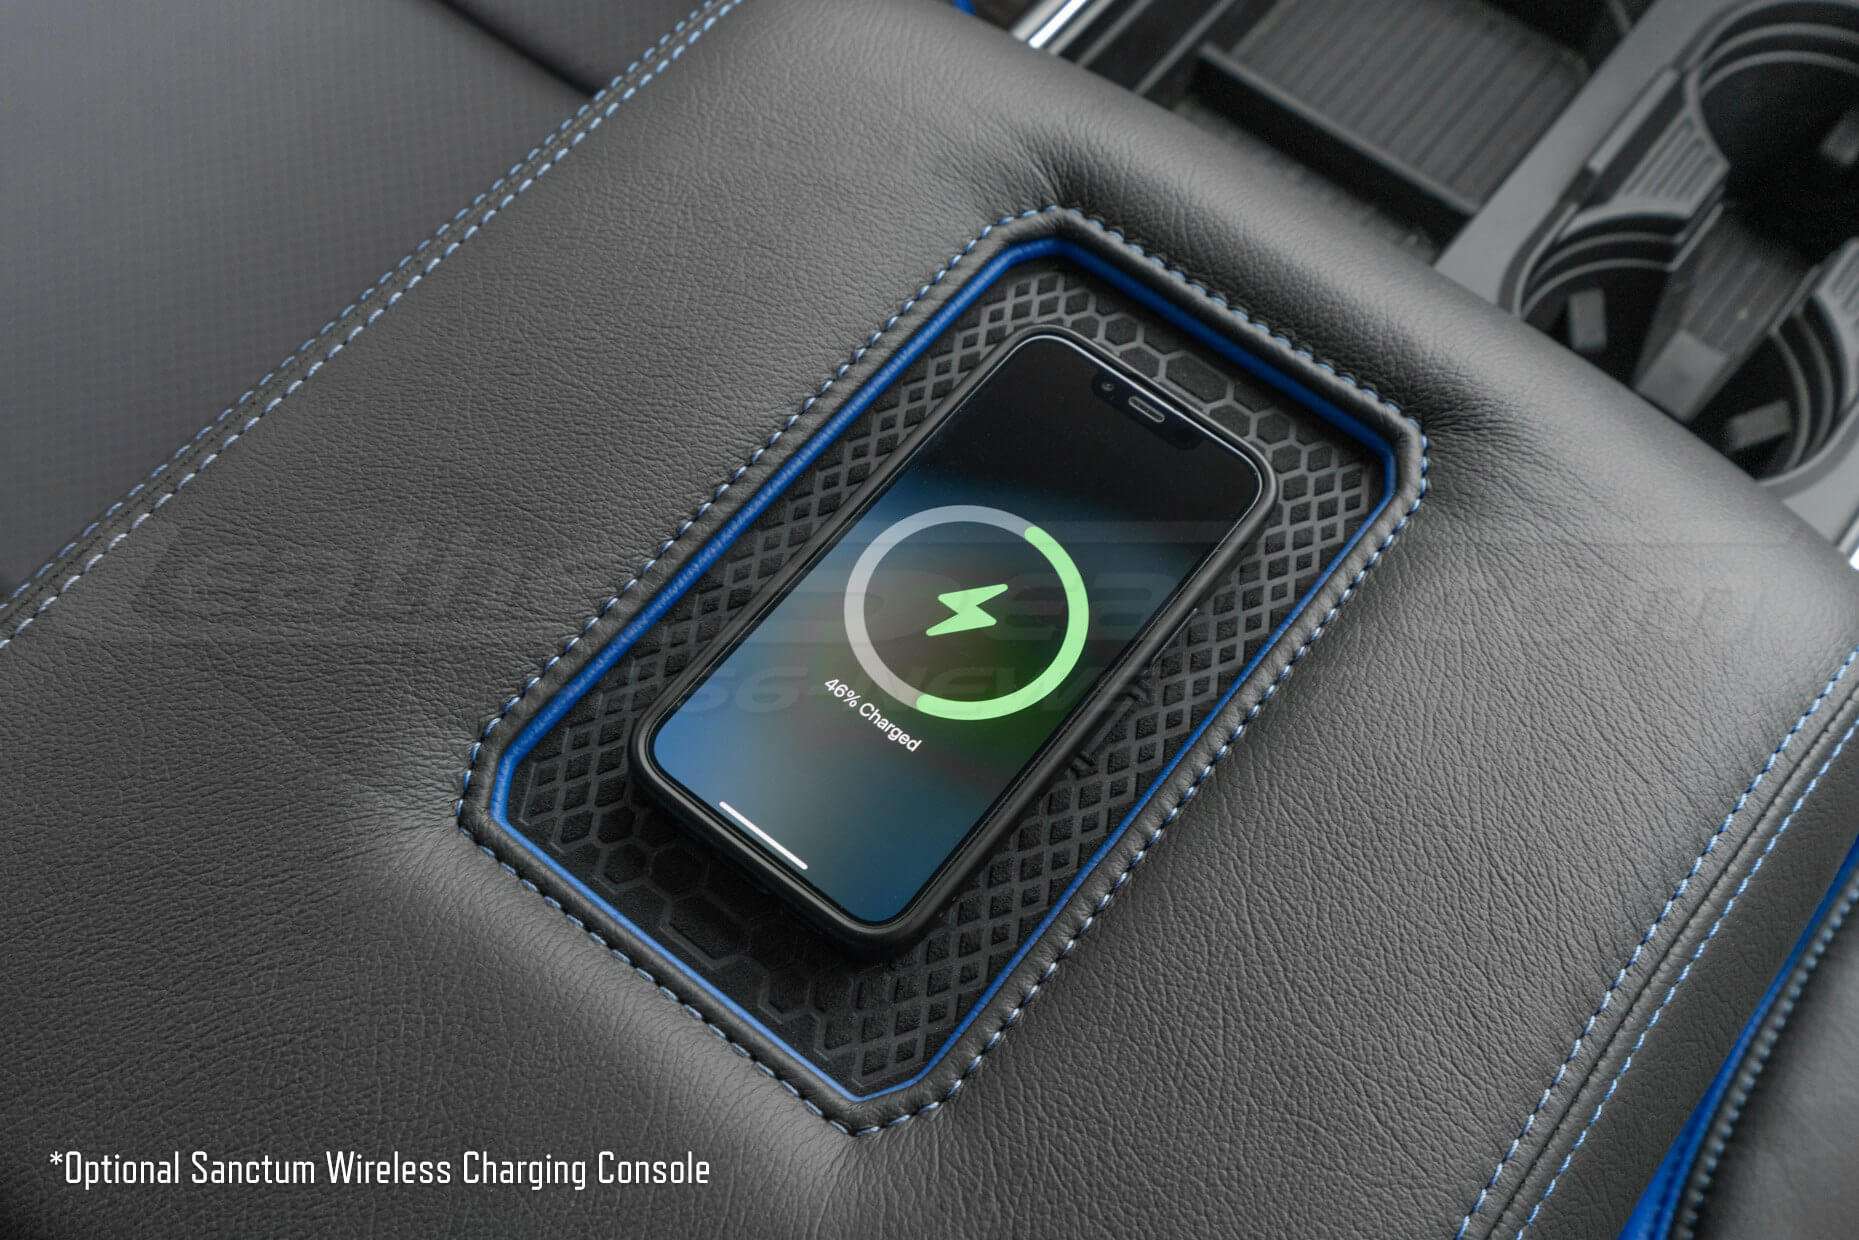 Optional Sanctum Wireless Charging console - Close up of phone charging